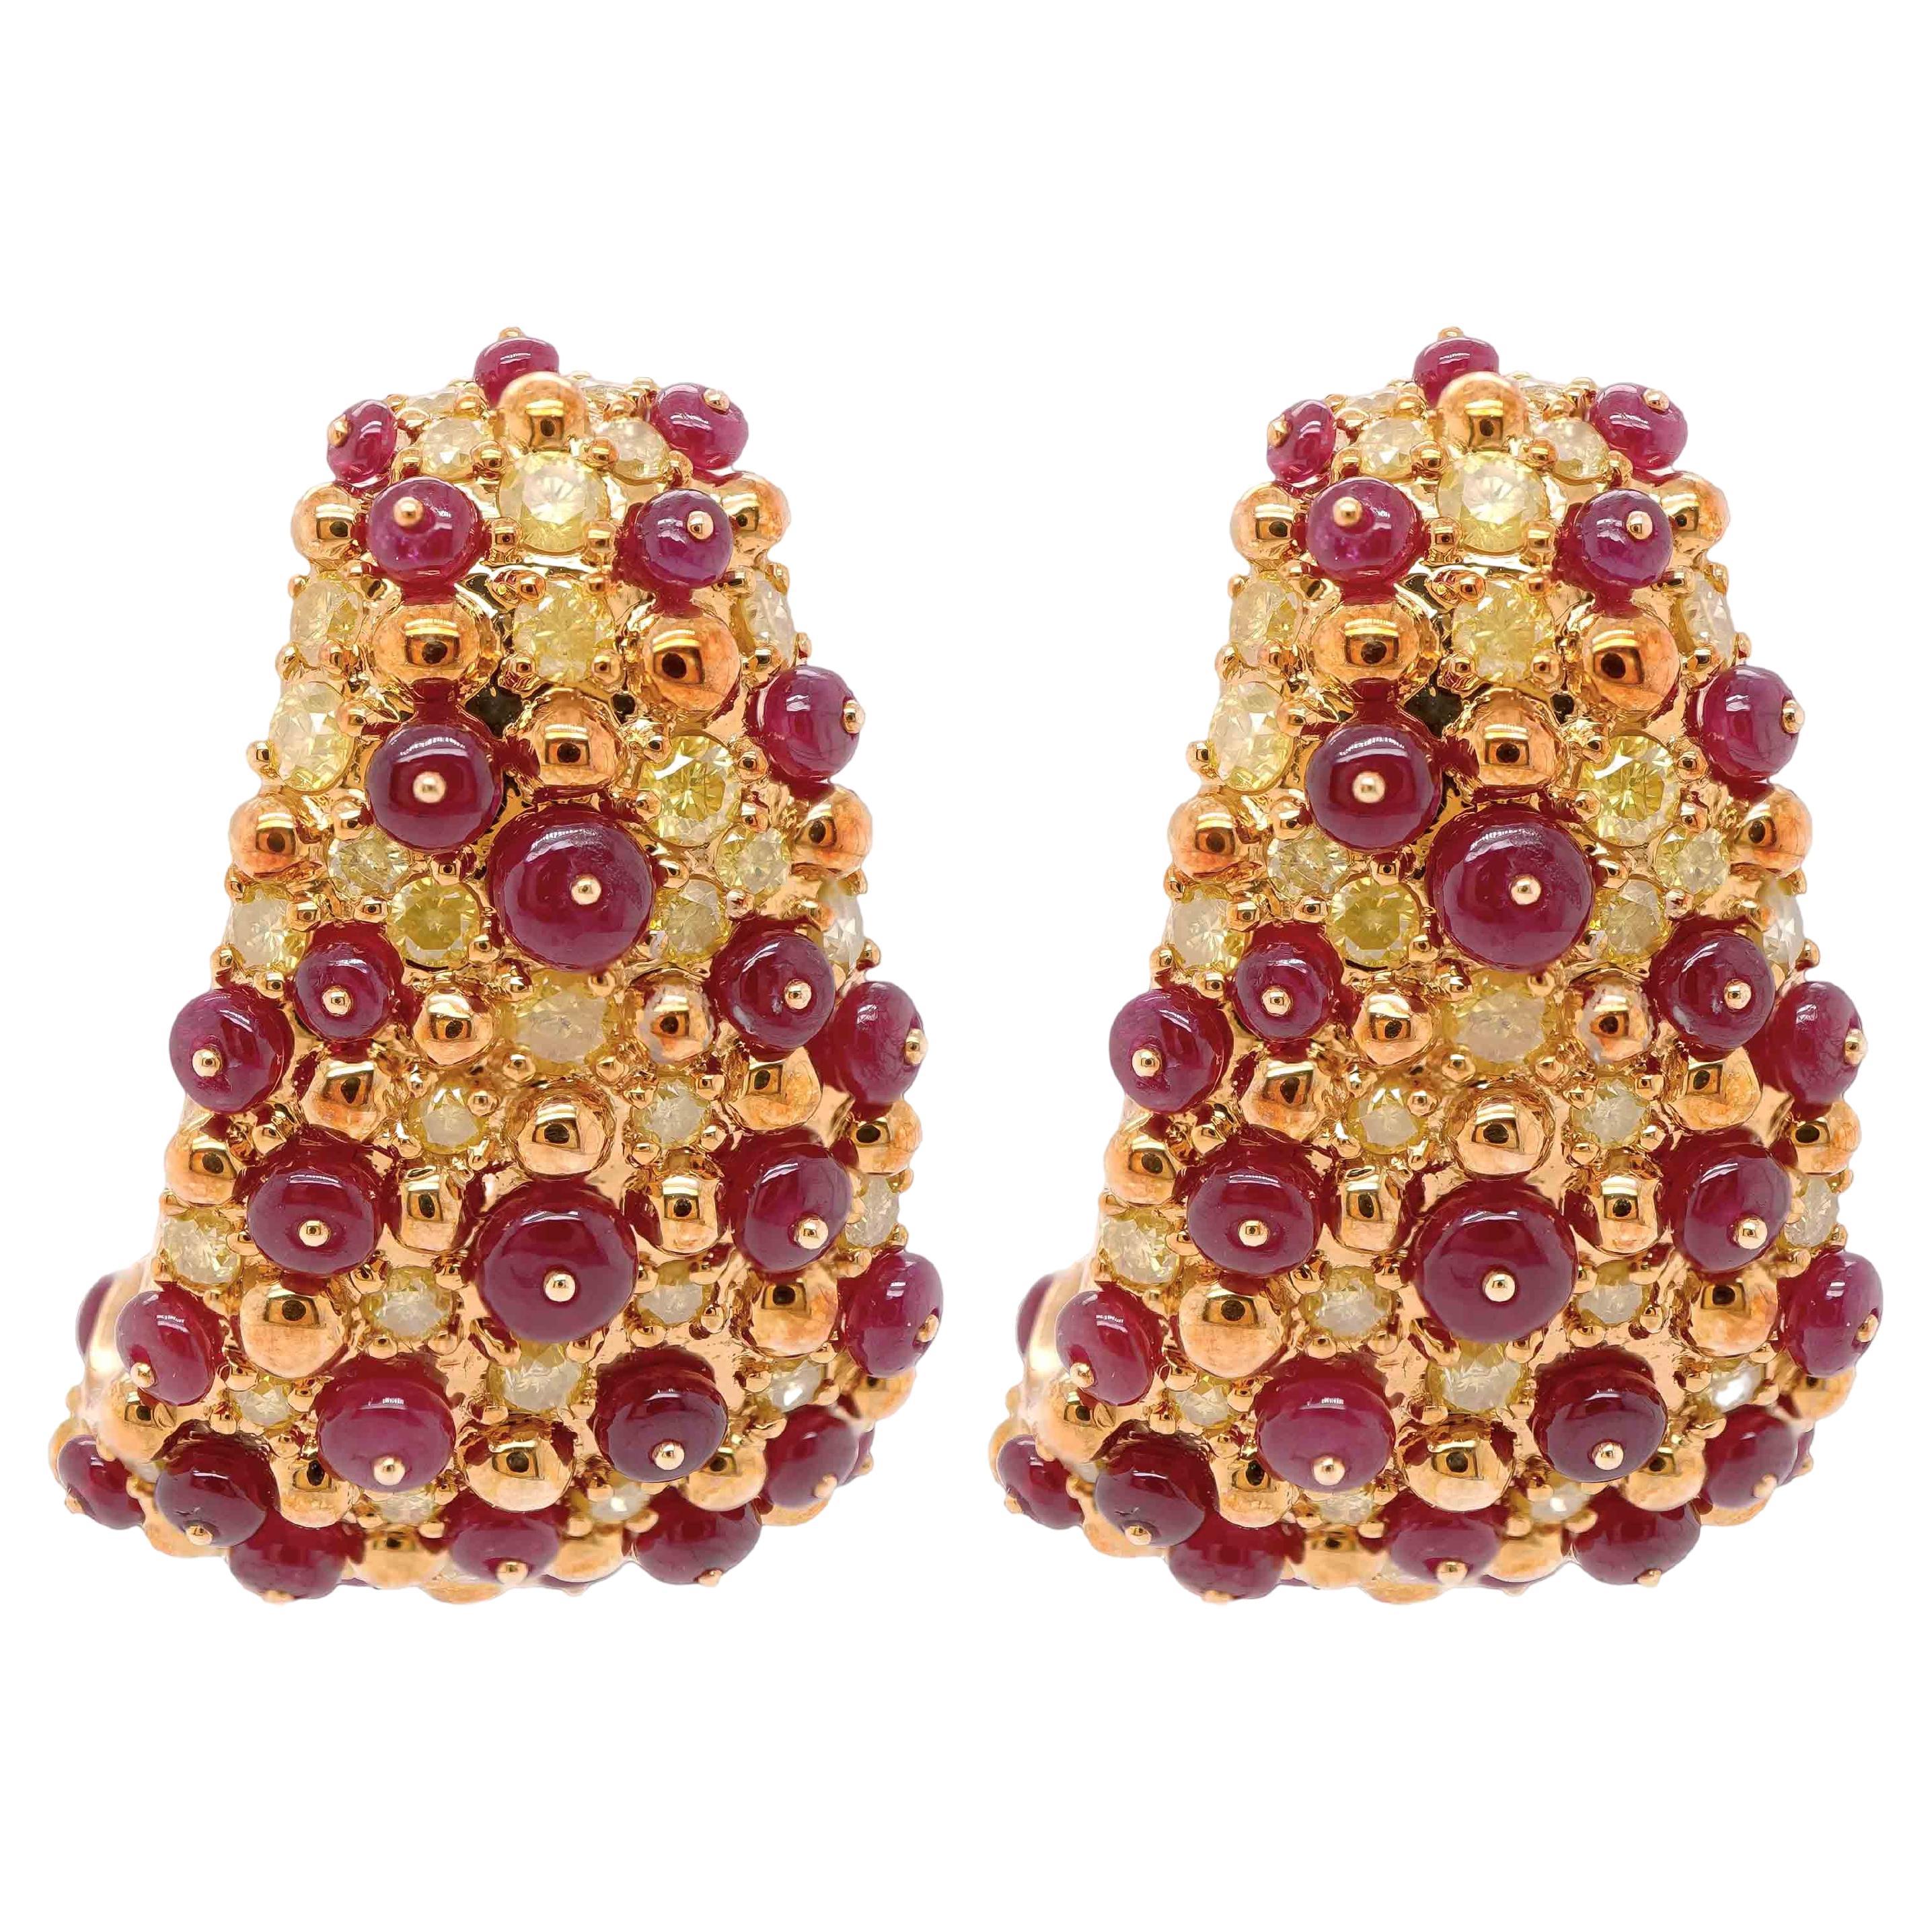 11.12 Carat Vivid Red Ruby with 3.81 Carat Fancy Vivid Yellow Designer Earring For Sale